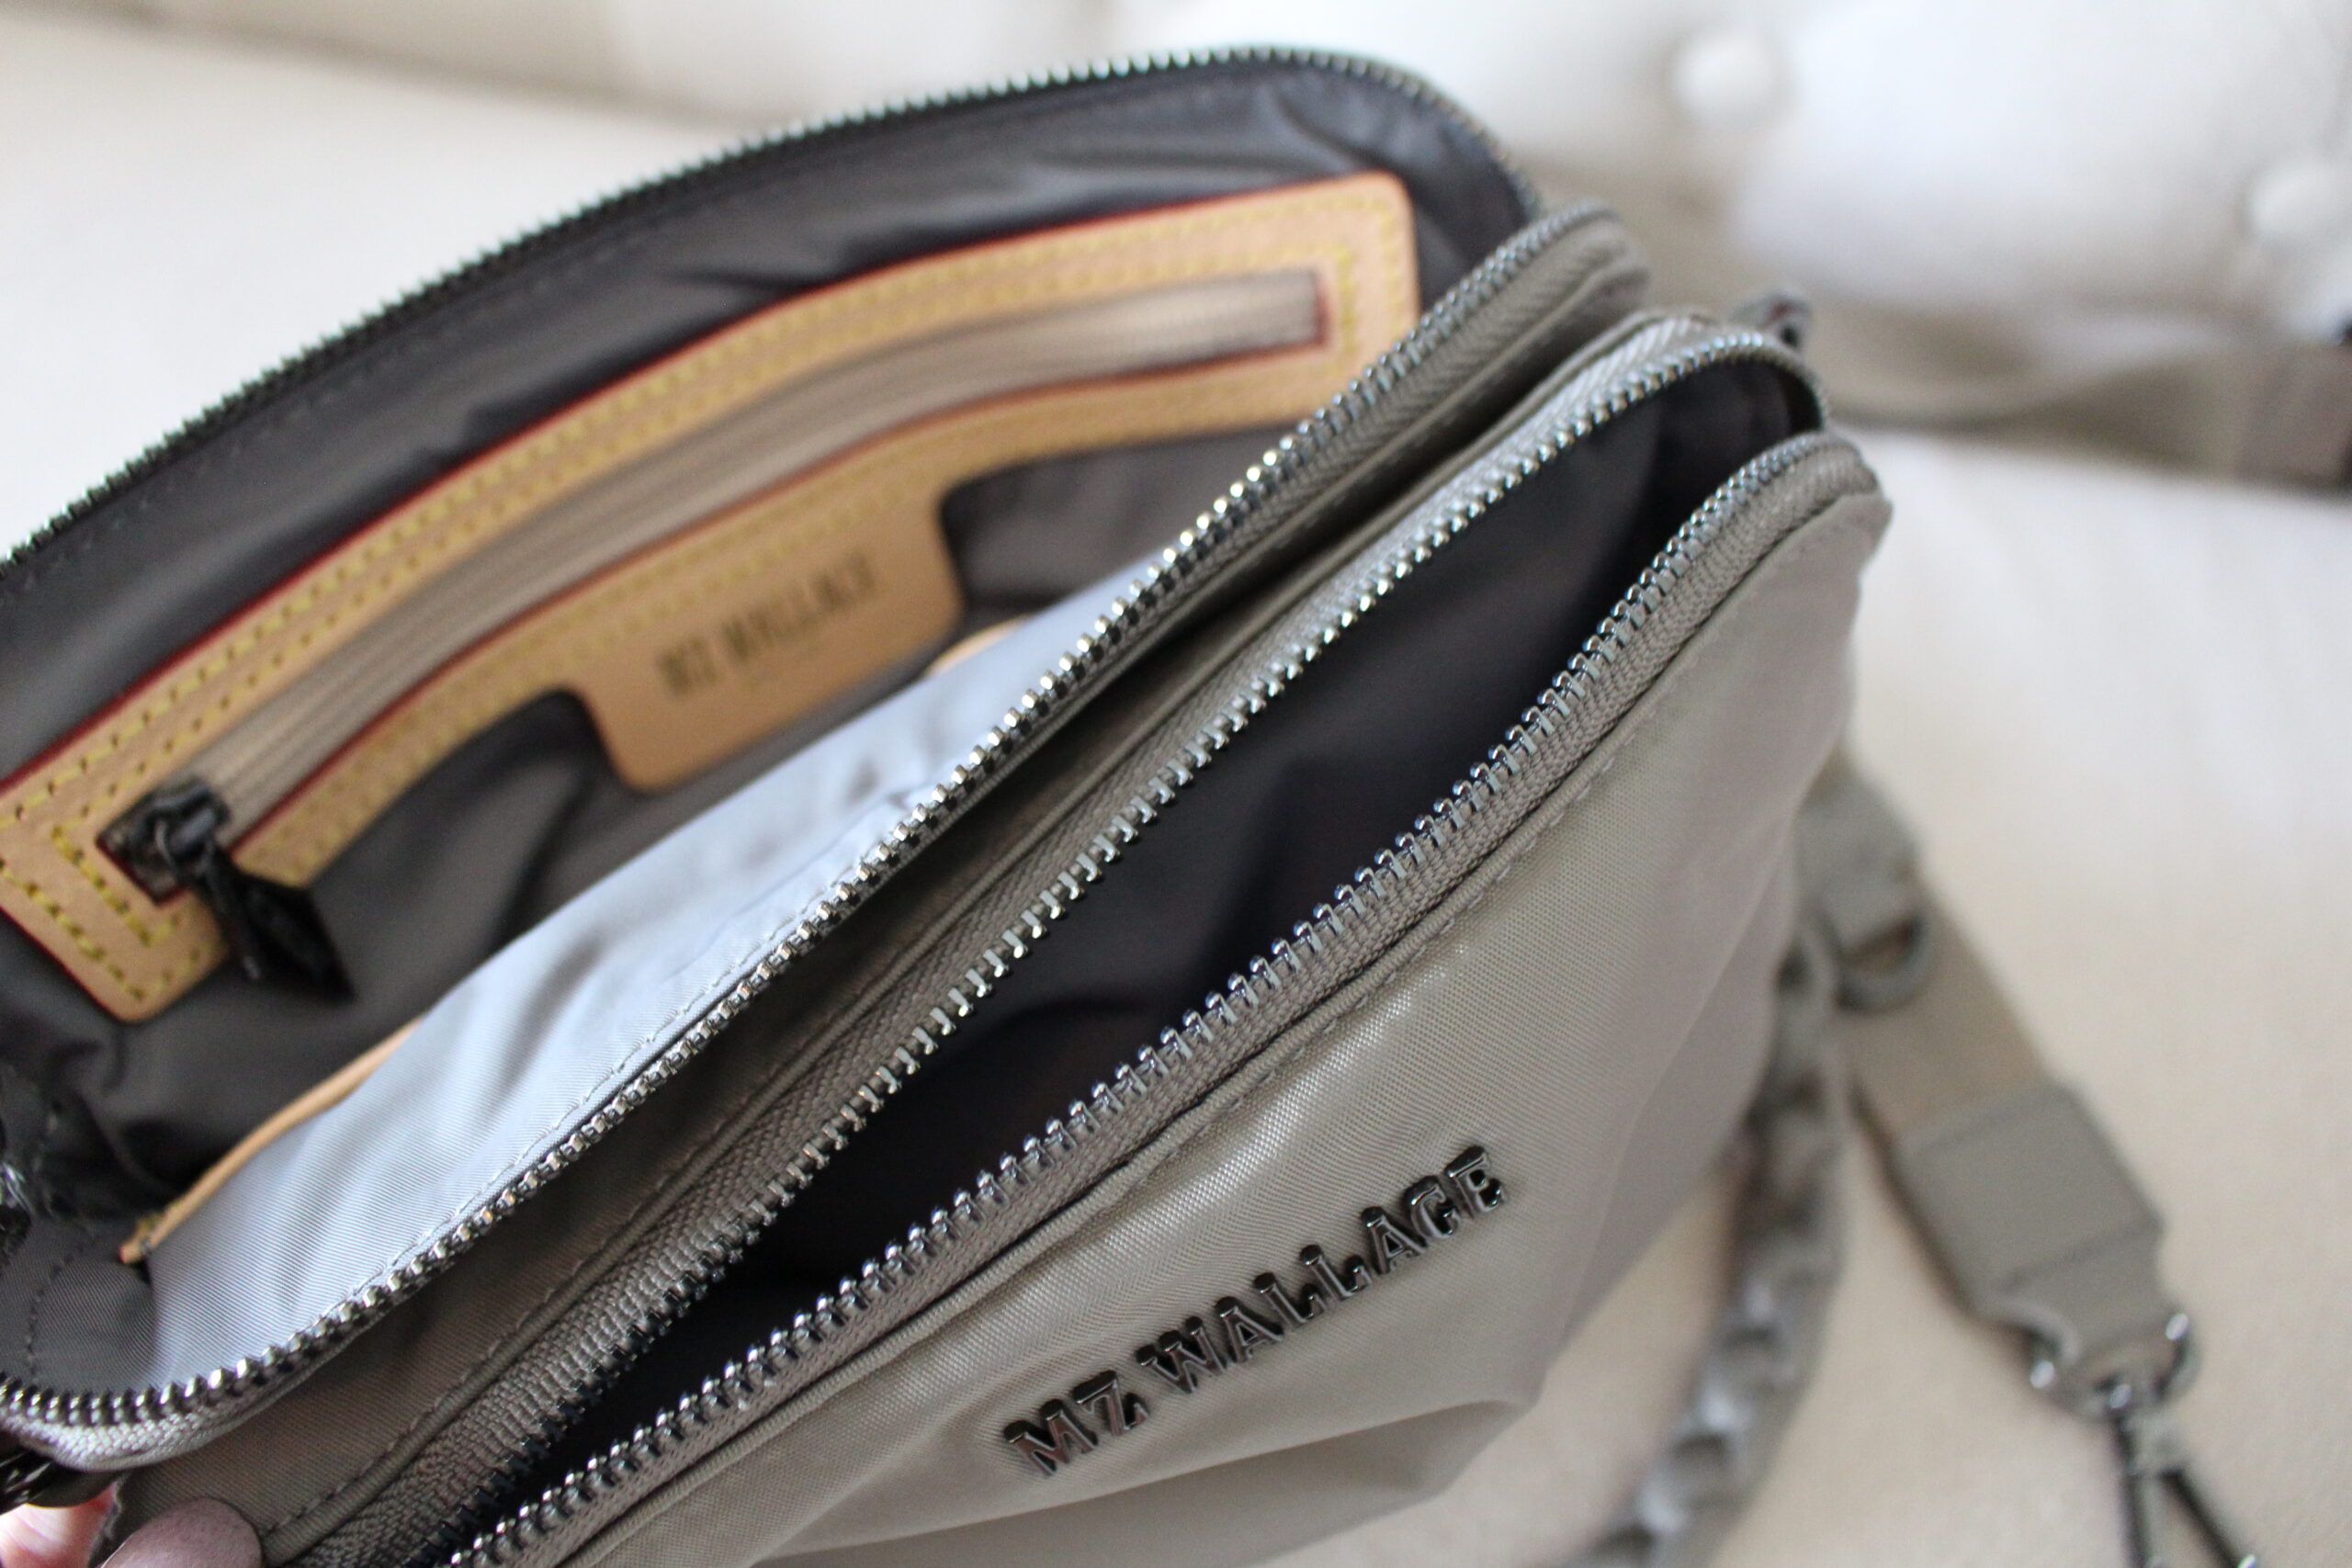 MZ WALLACE, Shoulder Bag Review & Packing Video!